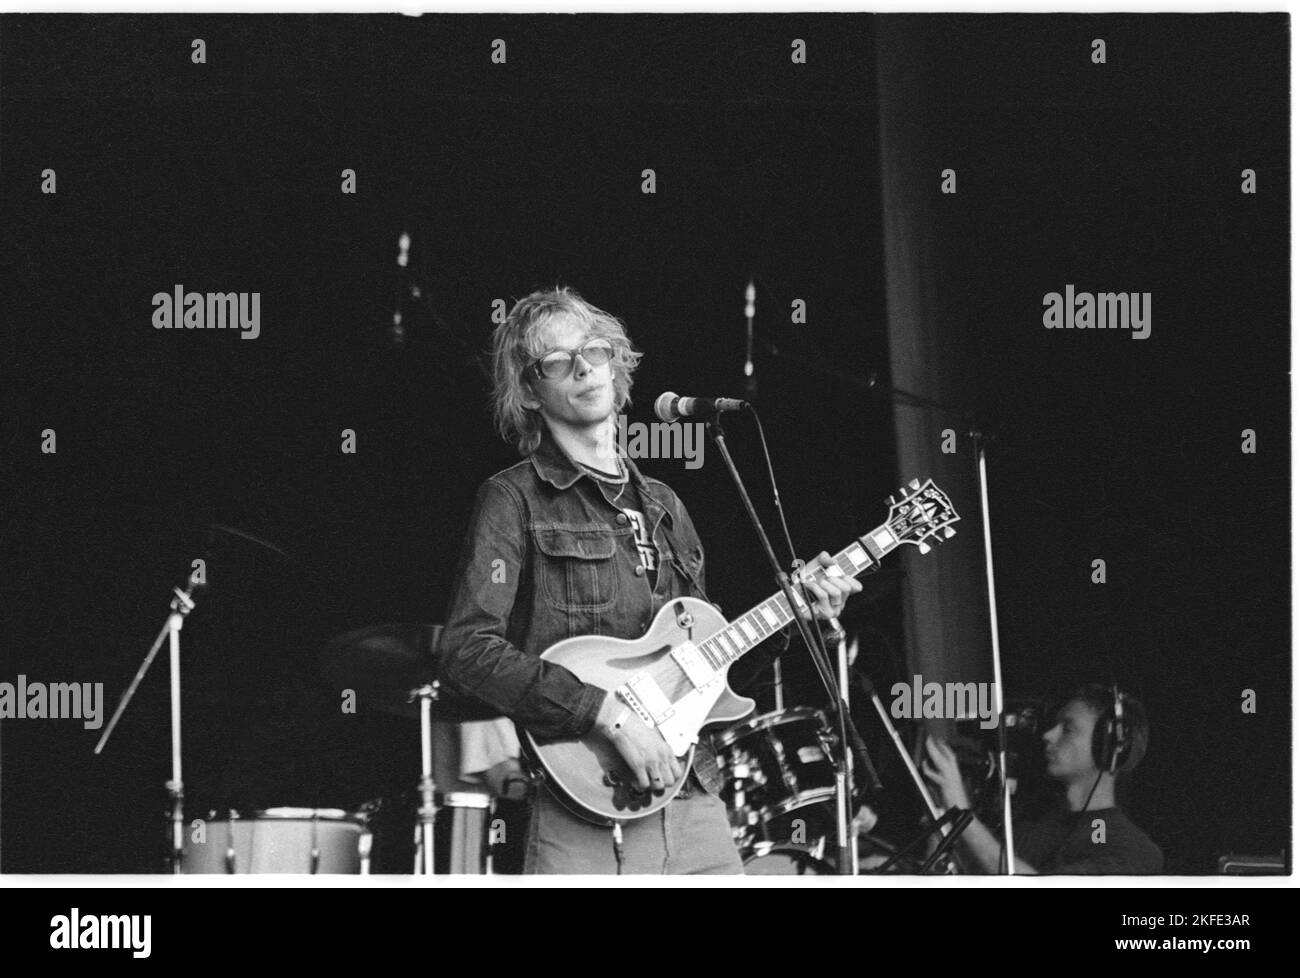 Andy Bell of British indie group Ride playing the Main Stage at Glastonbury, Saturday 25 June 1994. There was no Pyramid Stage that year following a fire. Andy Bell joined Oasis in 1999. Photograph © Rob Watkins Stock Photo